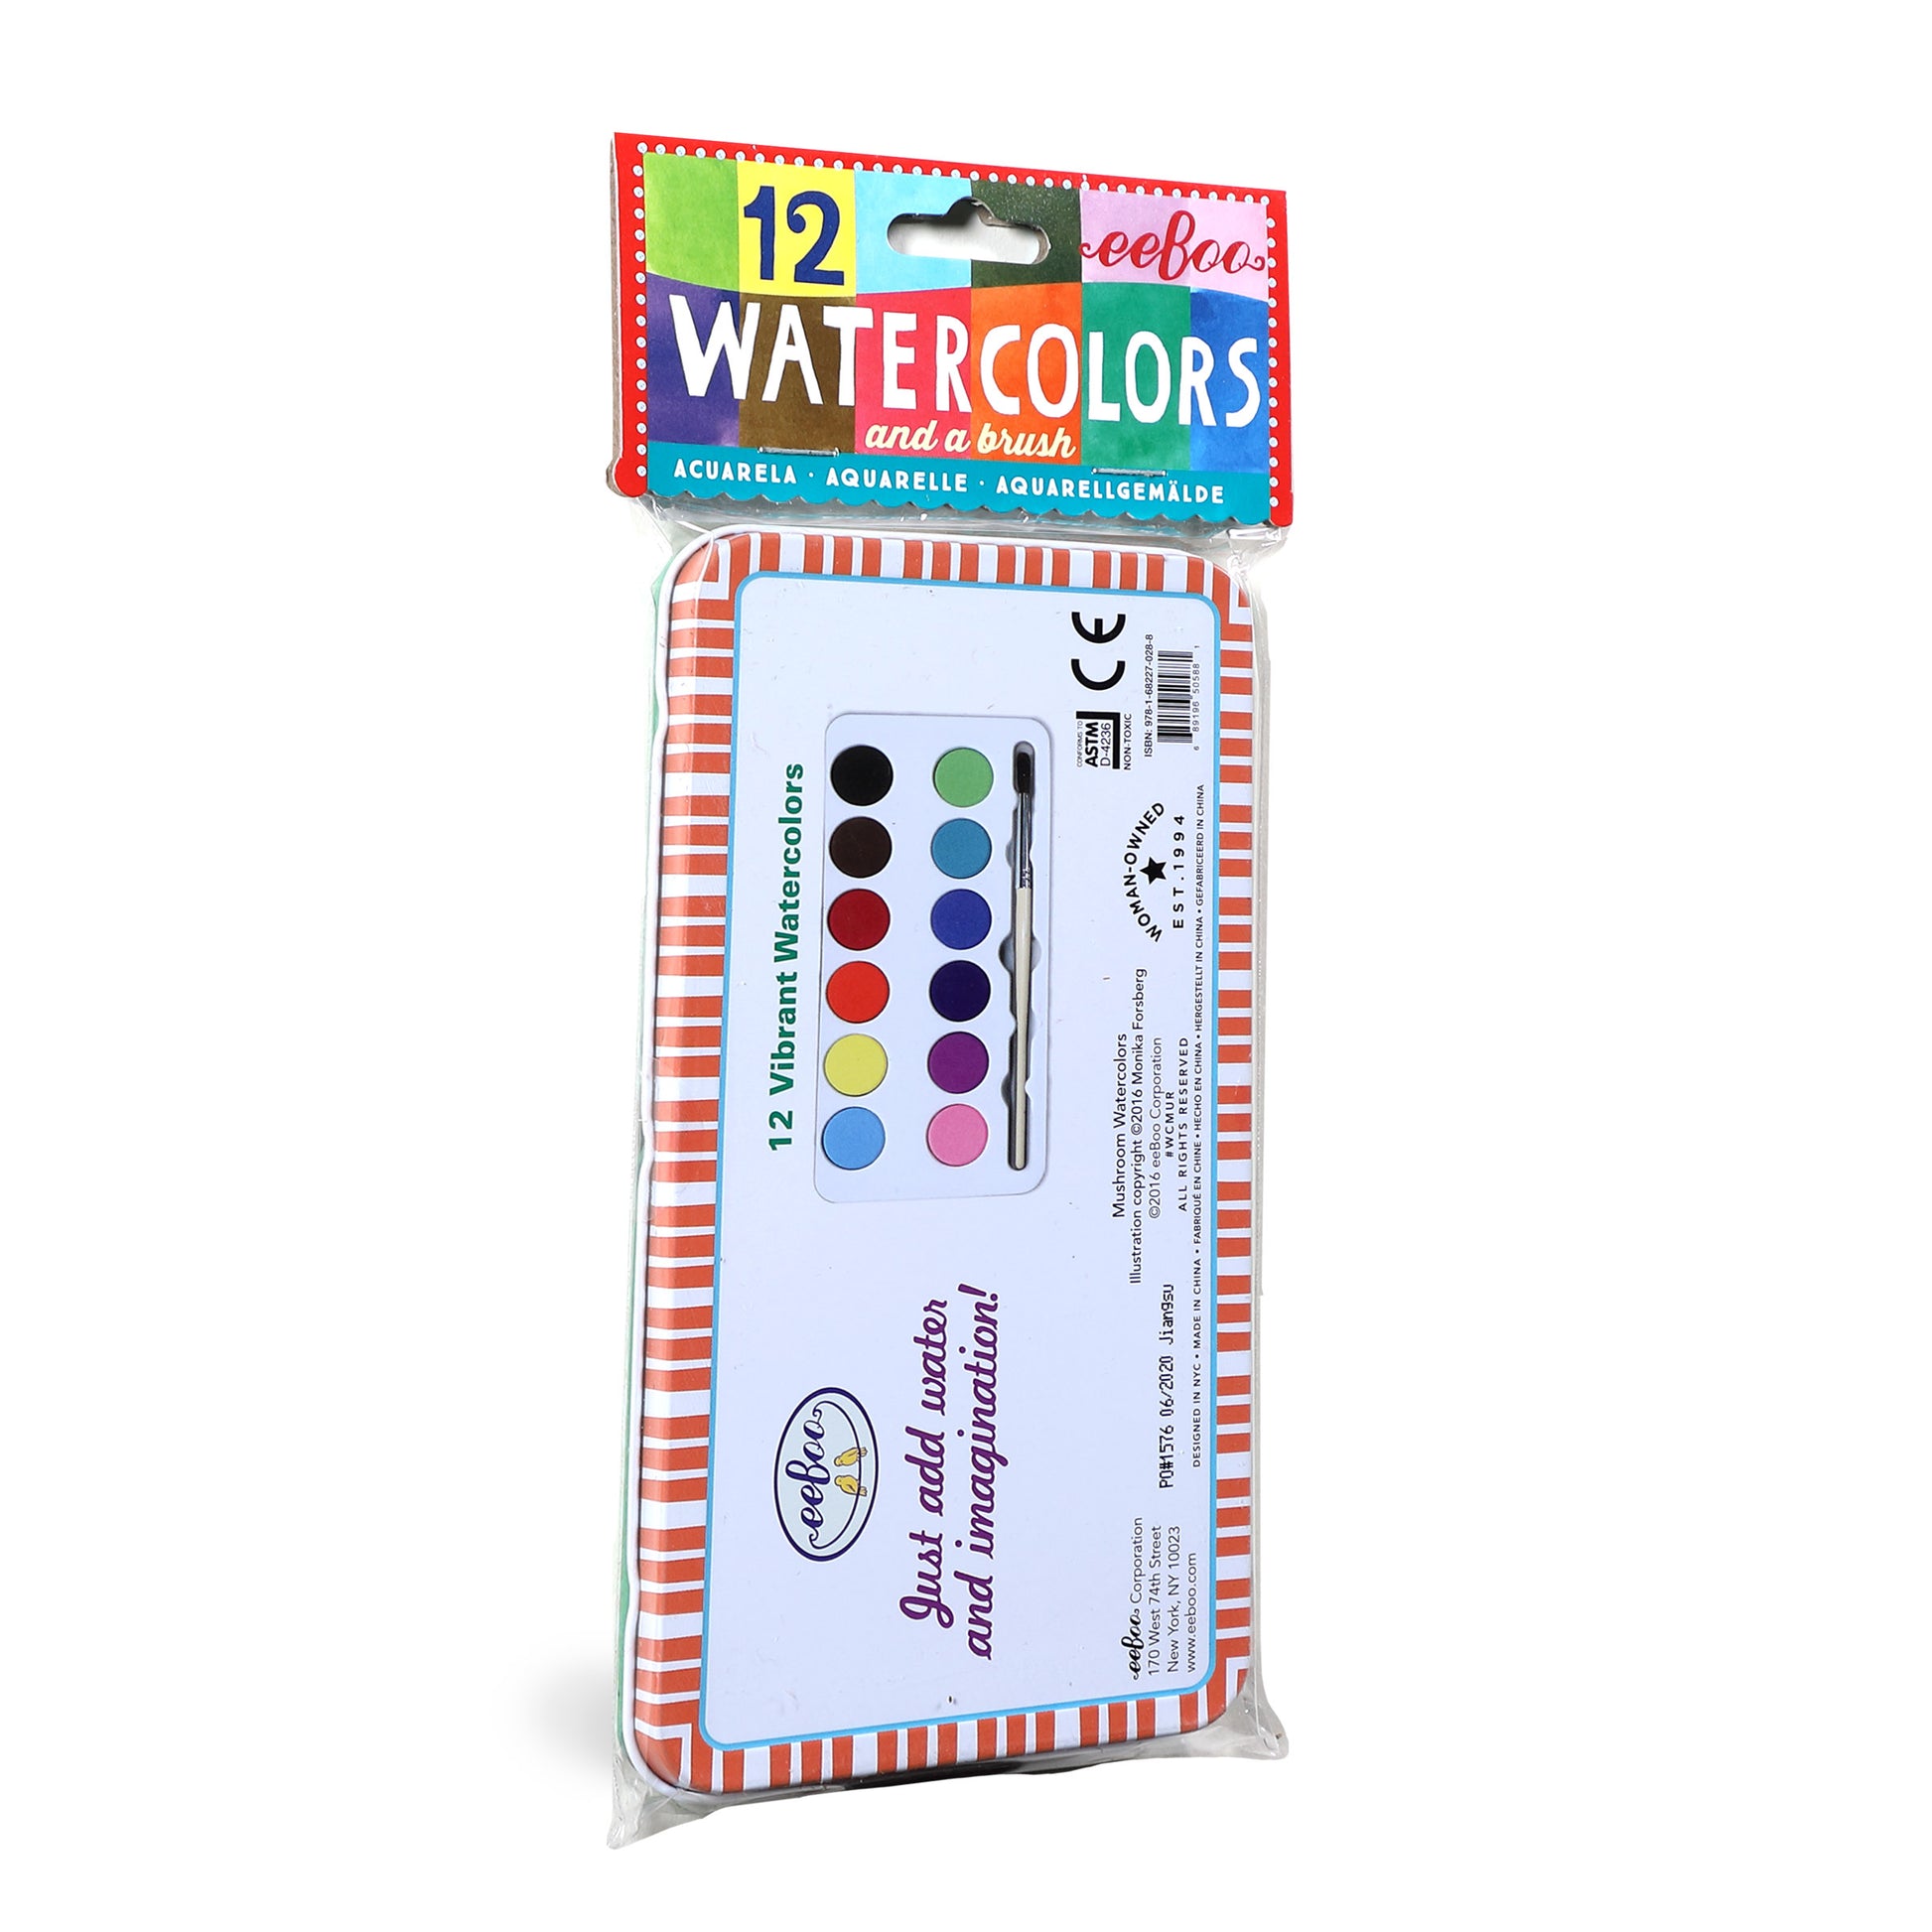 Woodland Watercolors and Pad Bundle |  Gifts by eeBoo